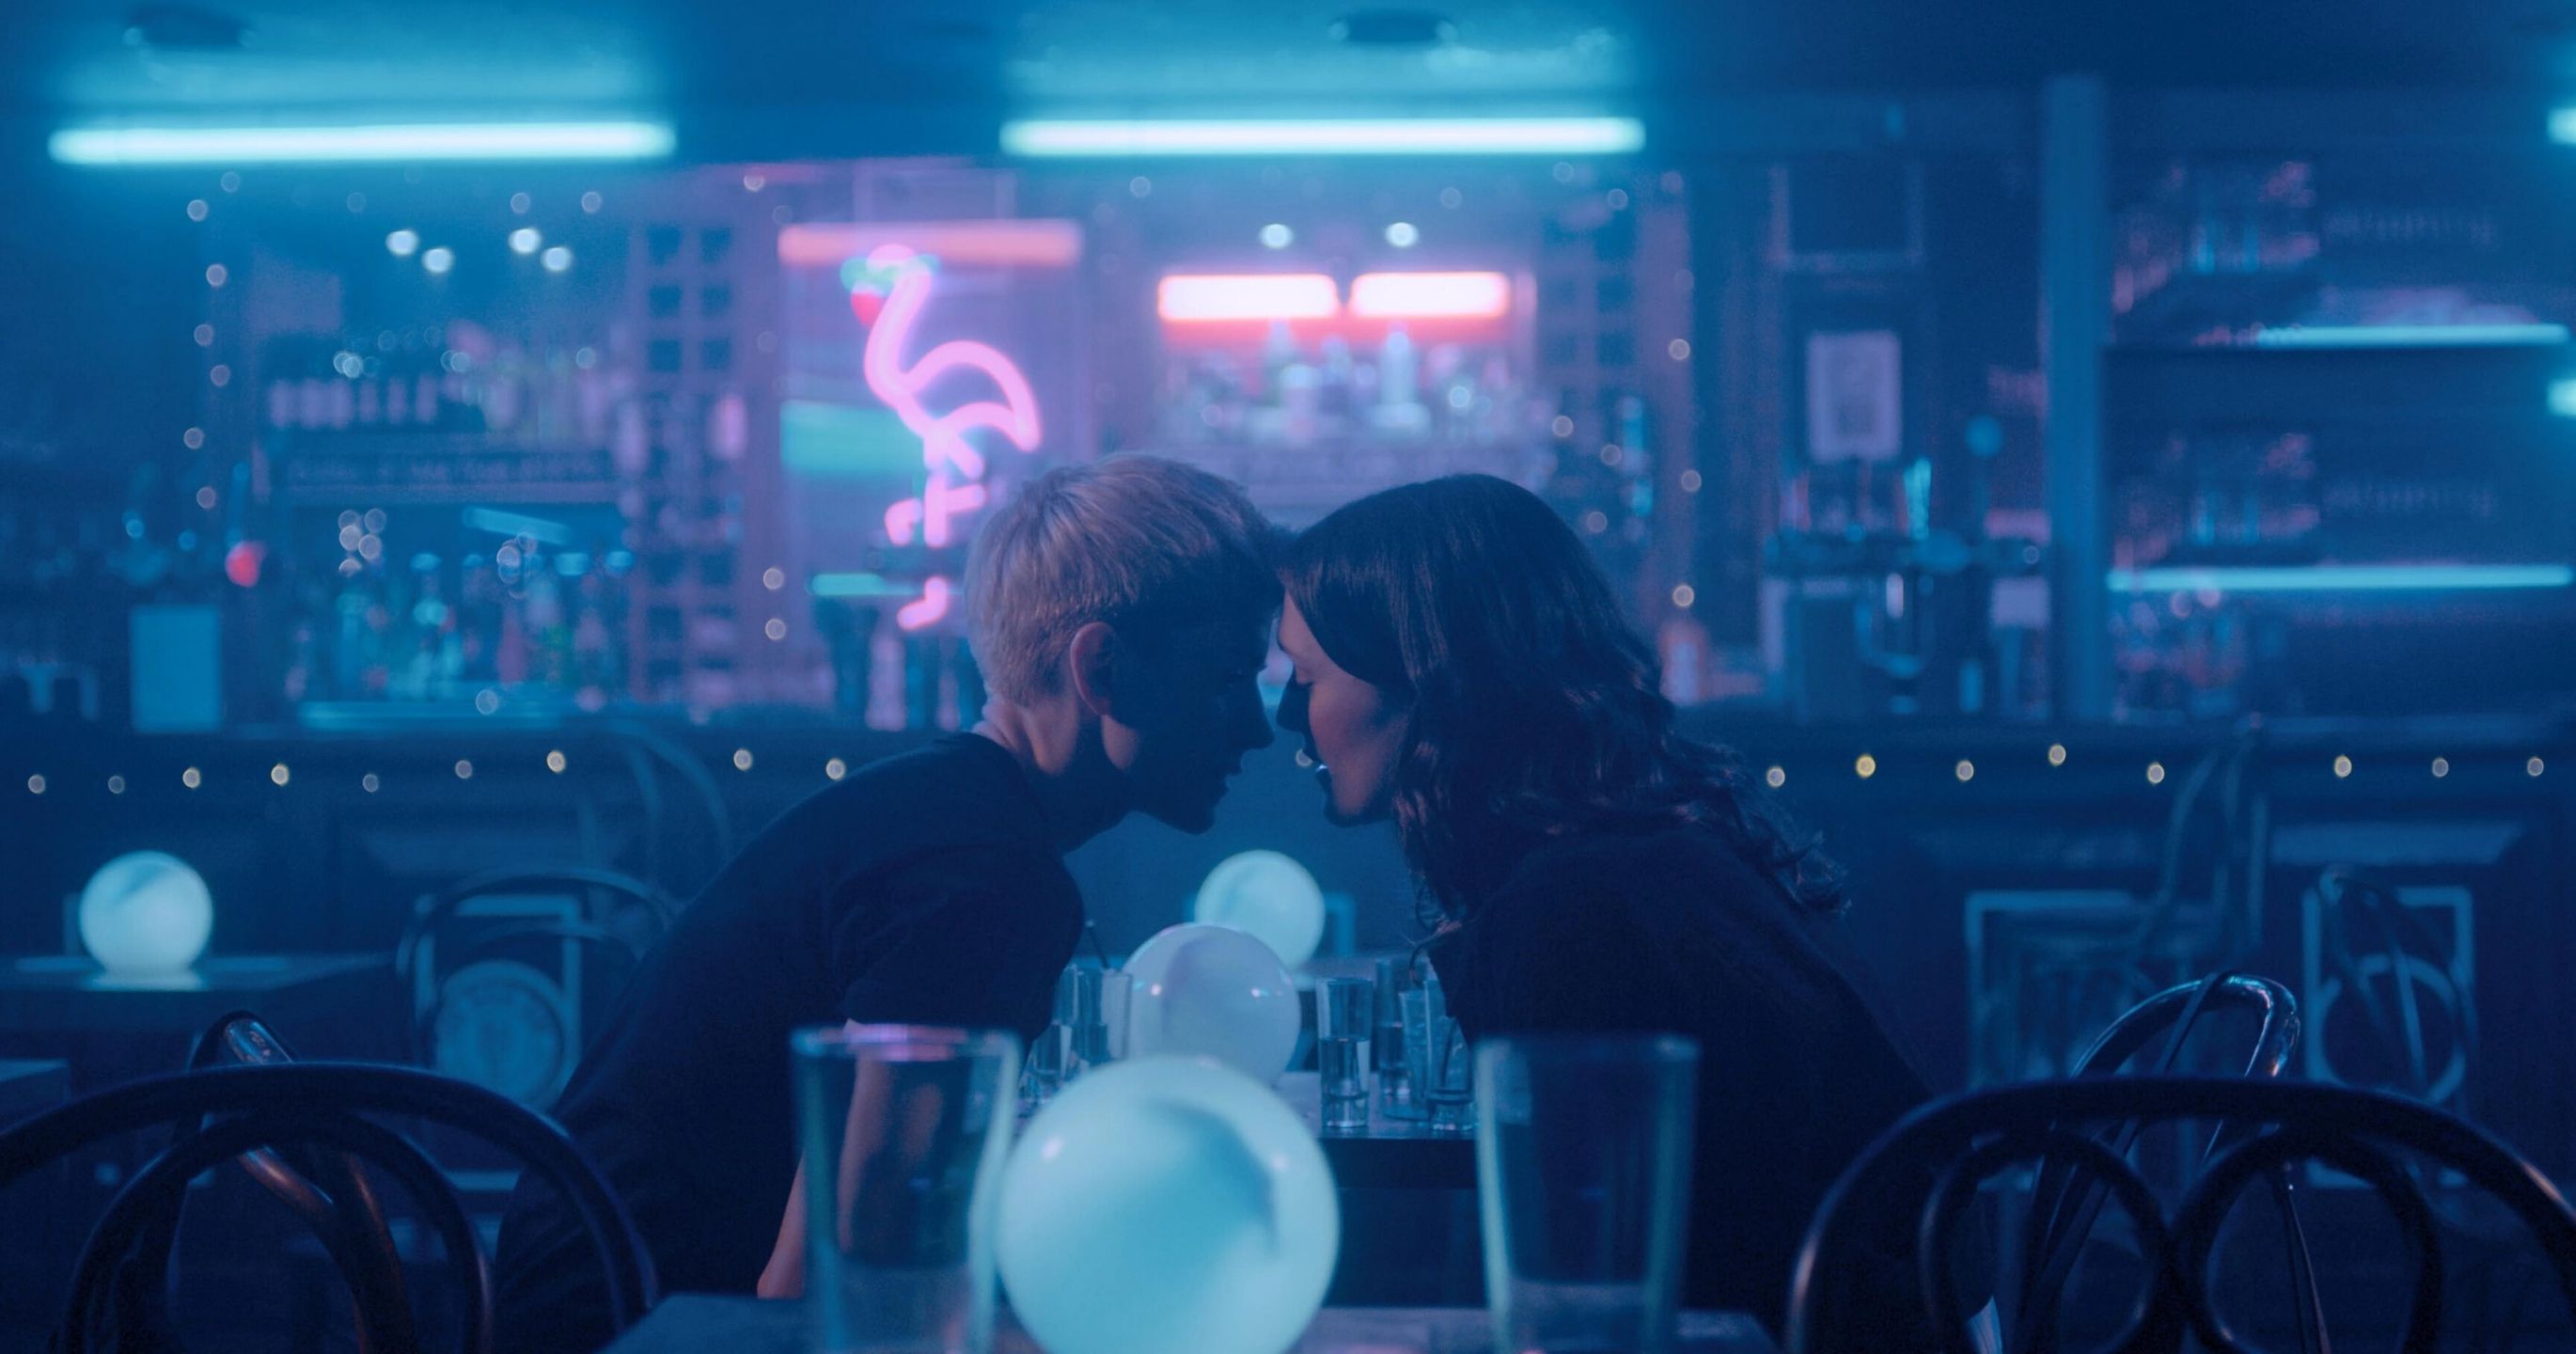 Two women about to kiss in a deserted bar